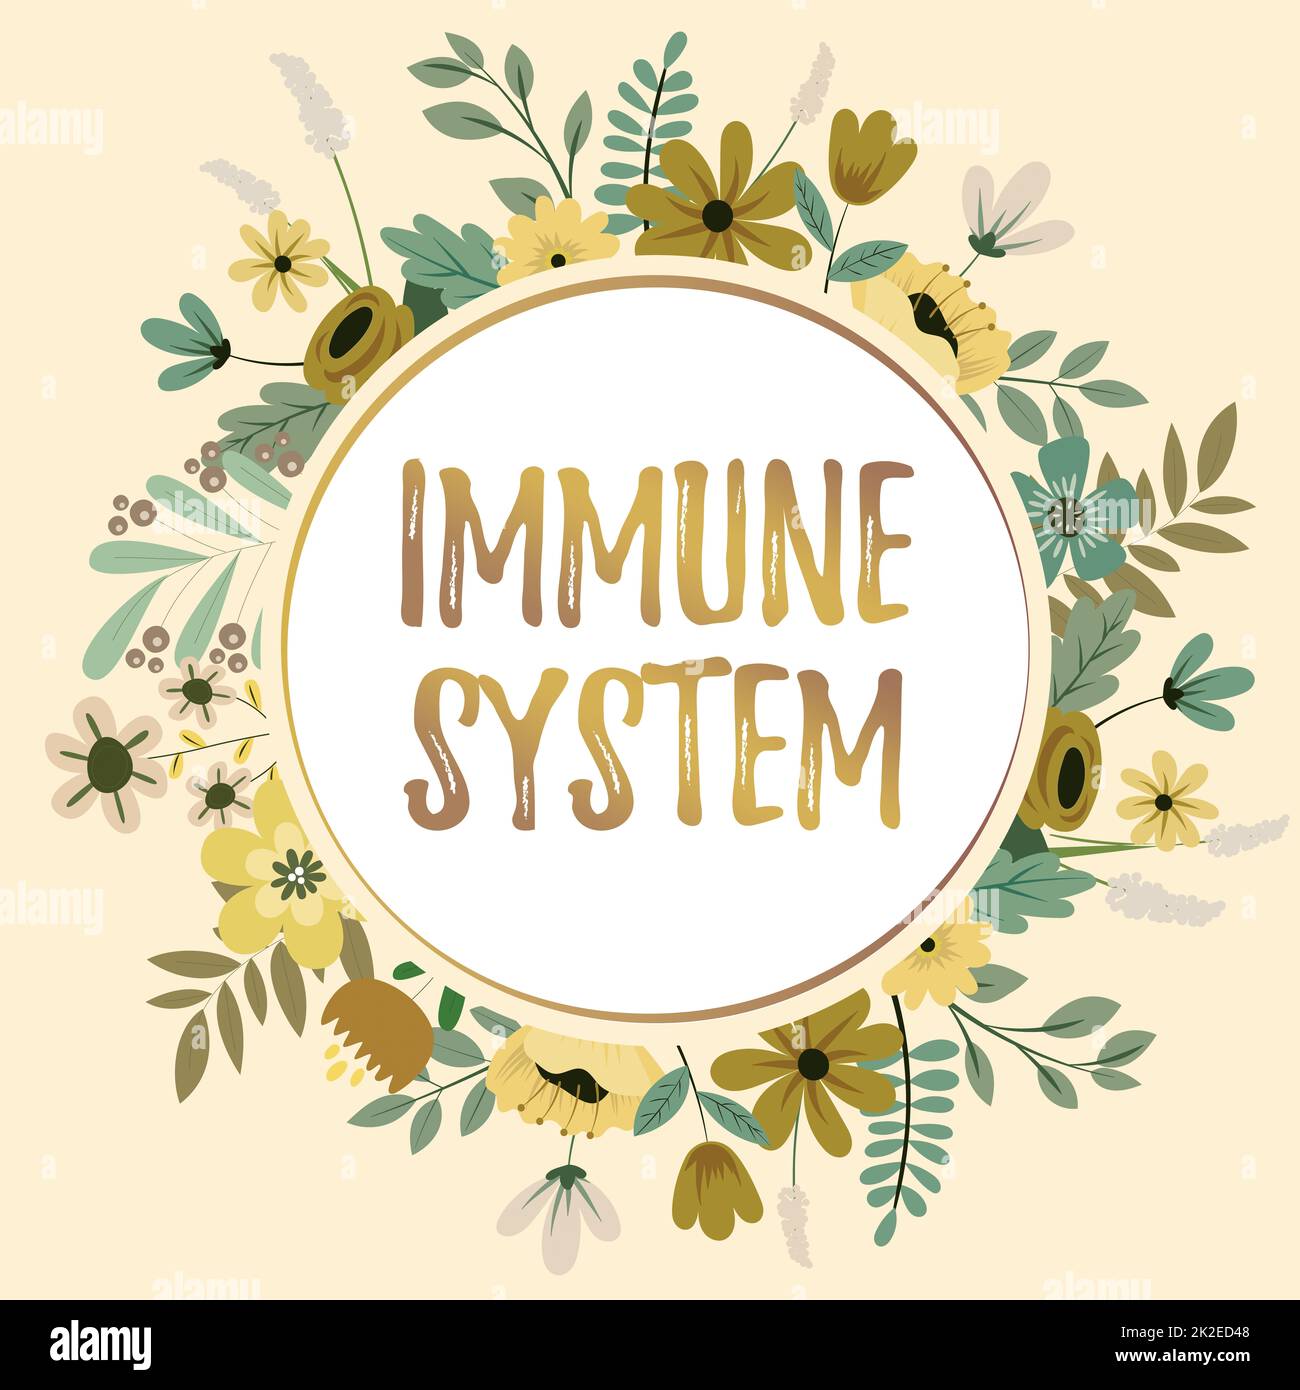 Sign displaying Immune System. Concept meaning host defense system comprising many biological structures Text Frame Surrounded With Assorted Flowers Hearts And Leaves. Stock Photo